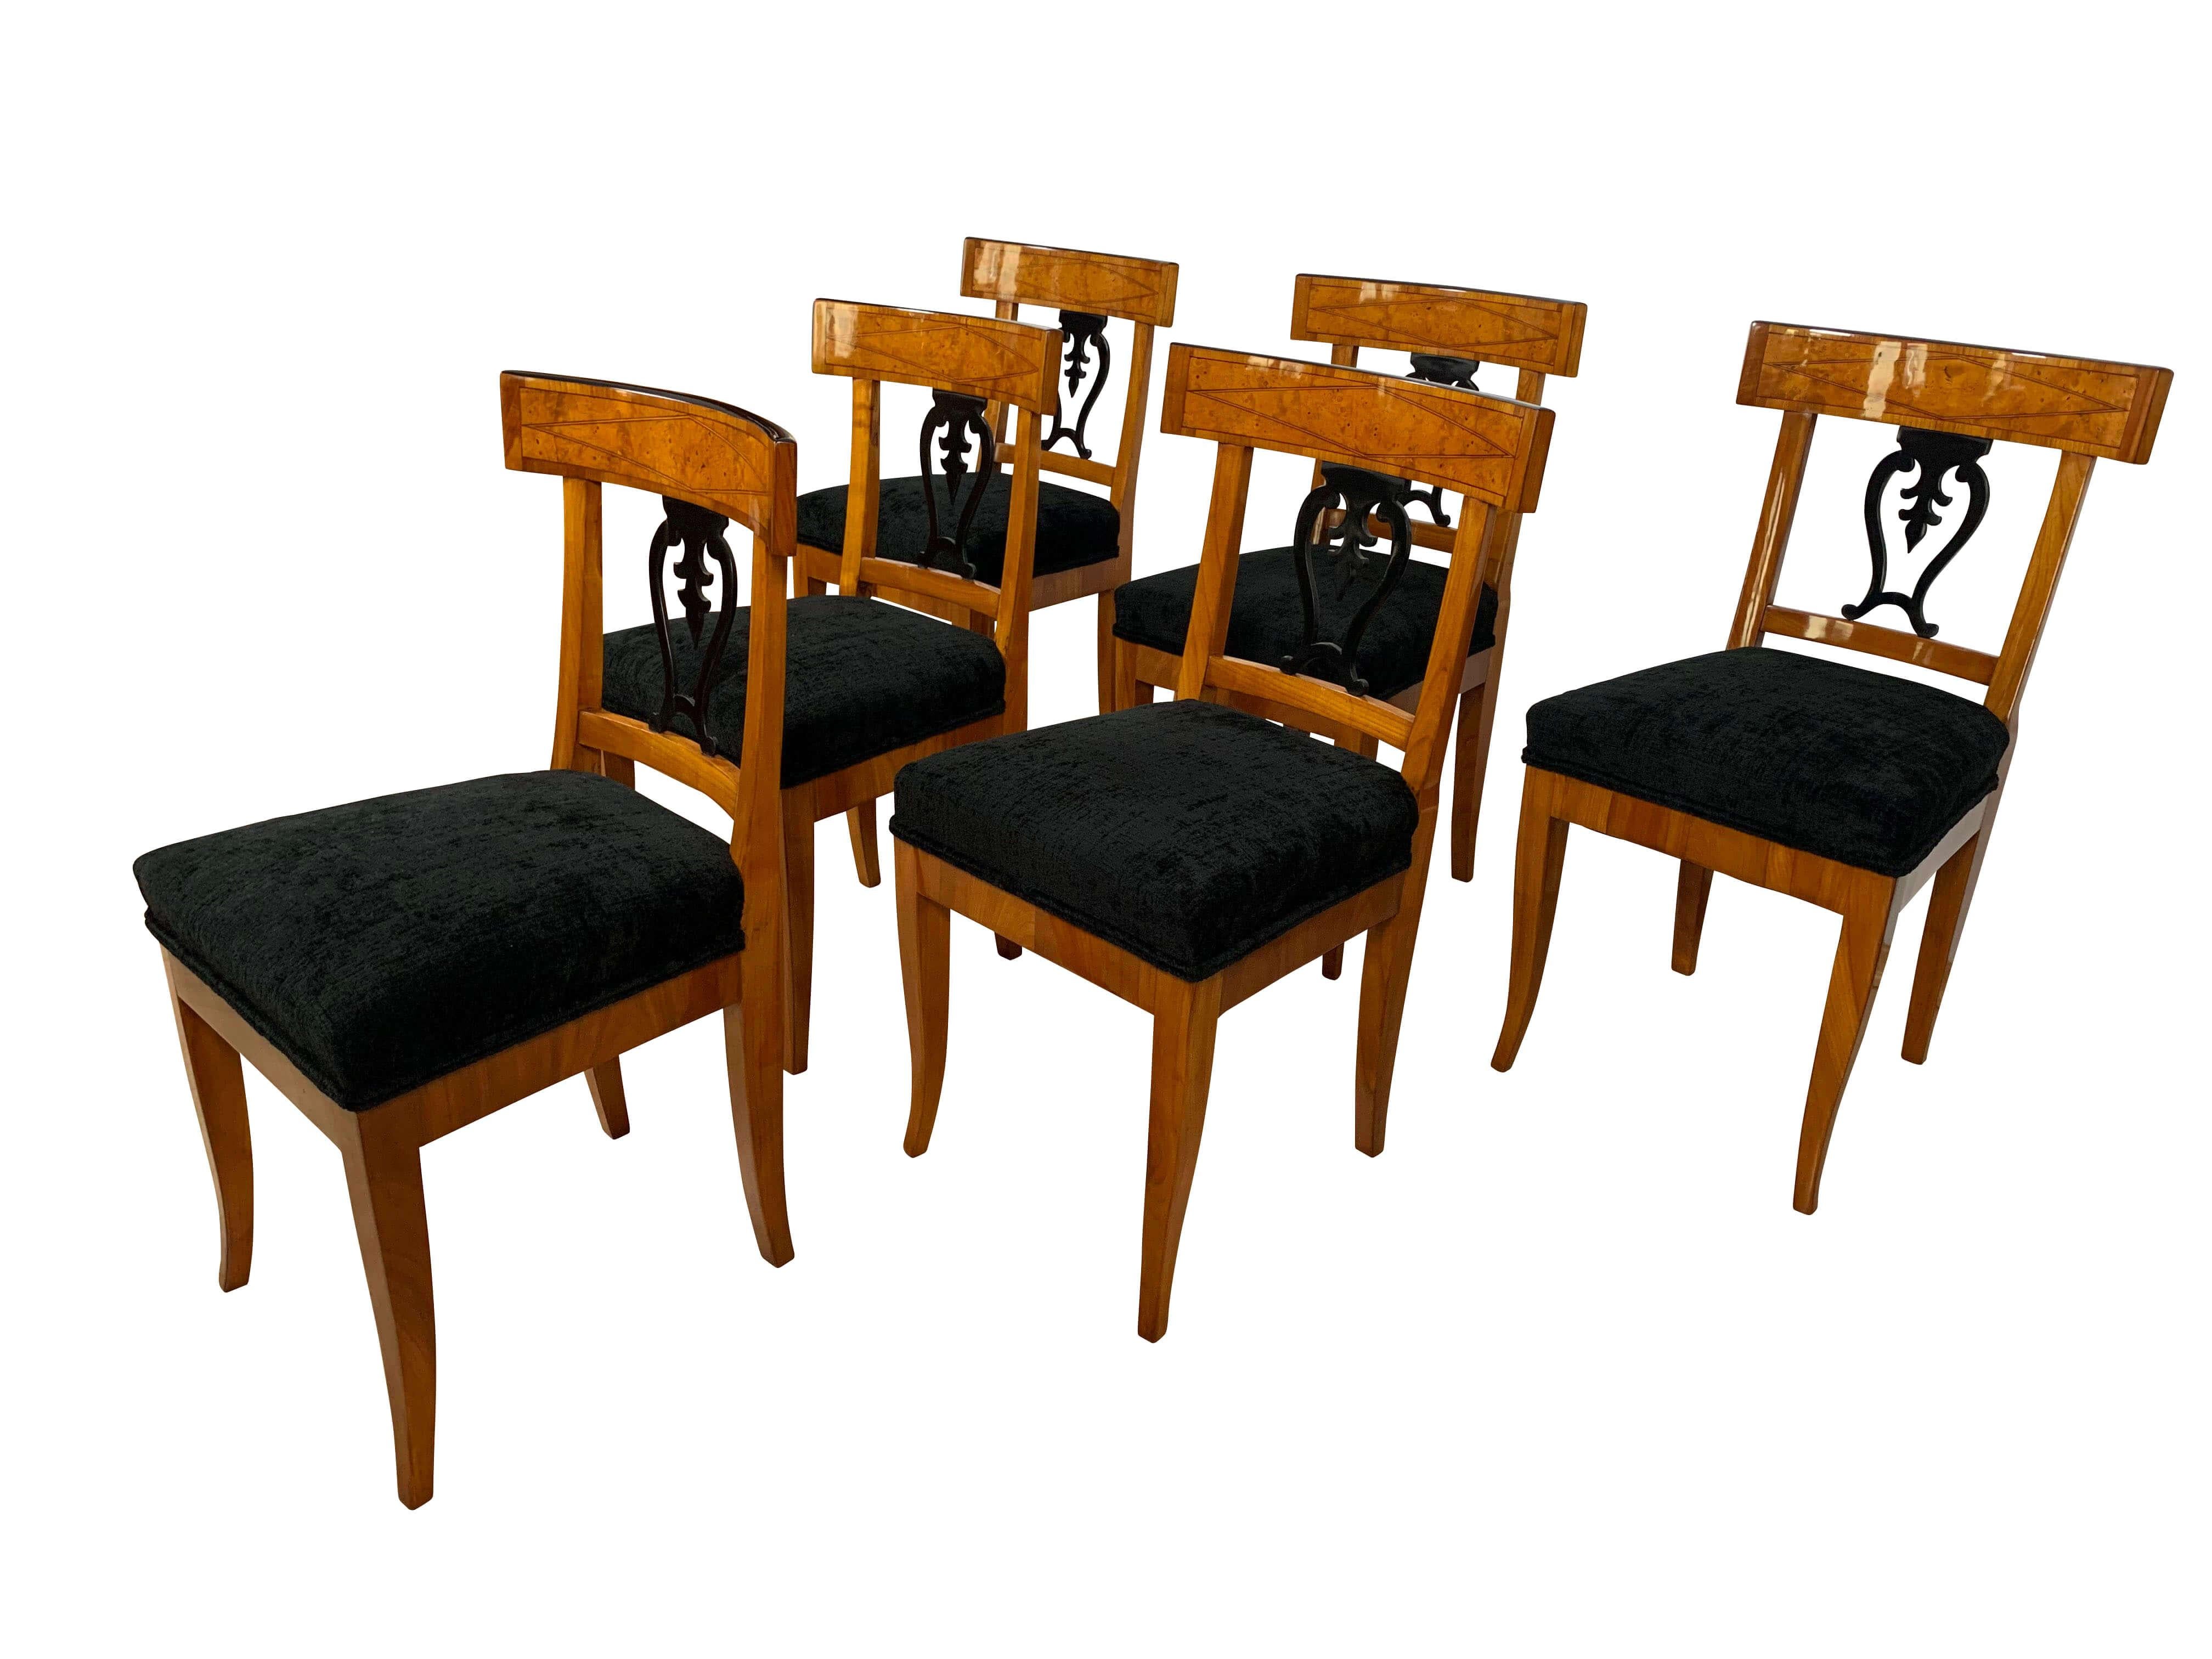 Beautiful set of six original, neoclassical early Biedermeier chairs from Thuringia, Germany, circa 1820.

Cherrywood veneered and solid, inlay on the backrest made with ash root veneer, maple and pear (?).
Lovely ebonized back decor and ebonized